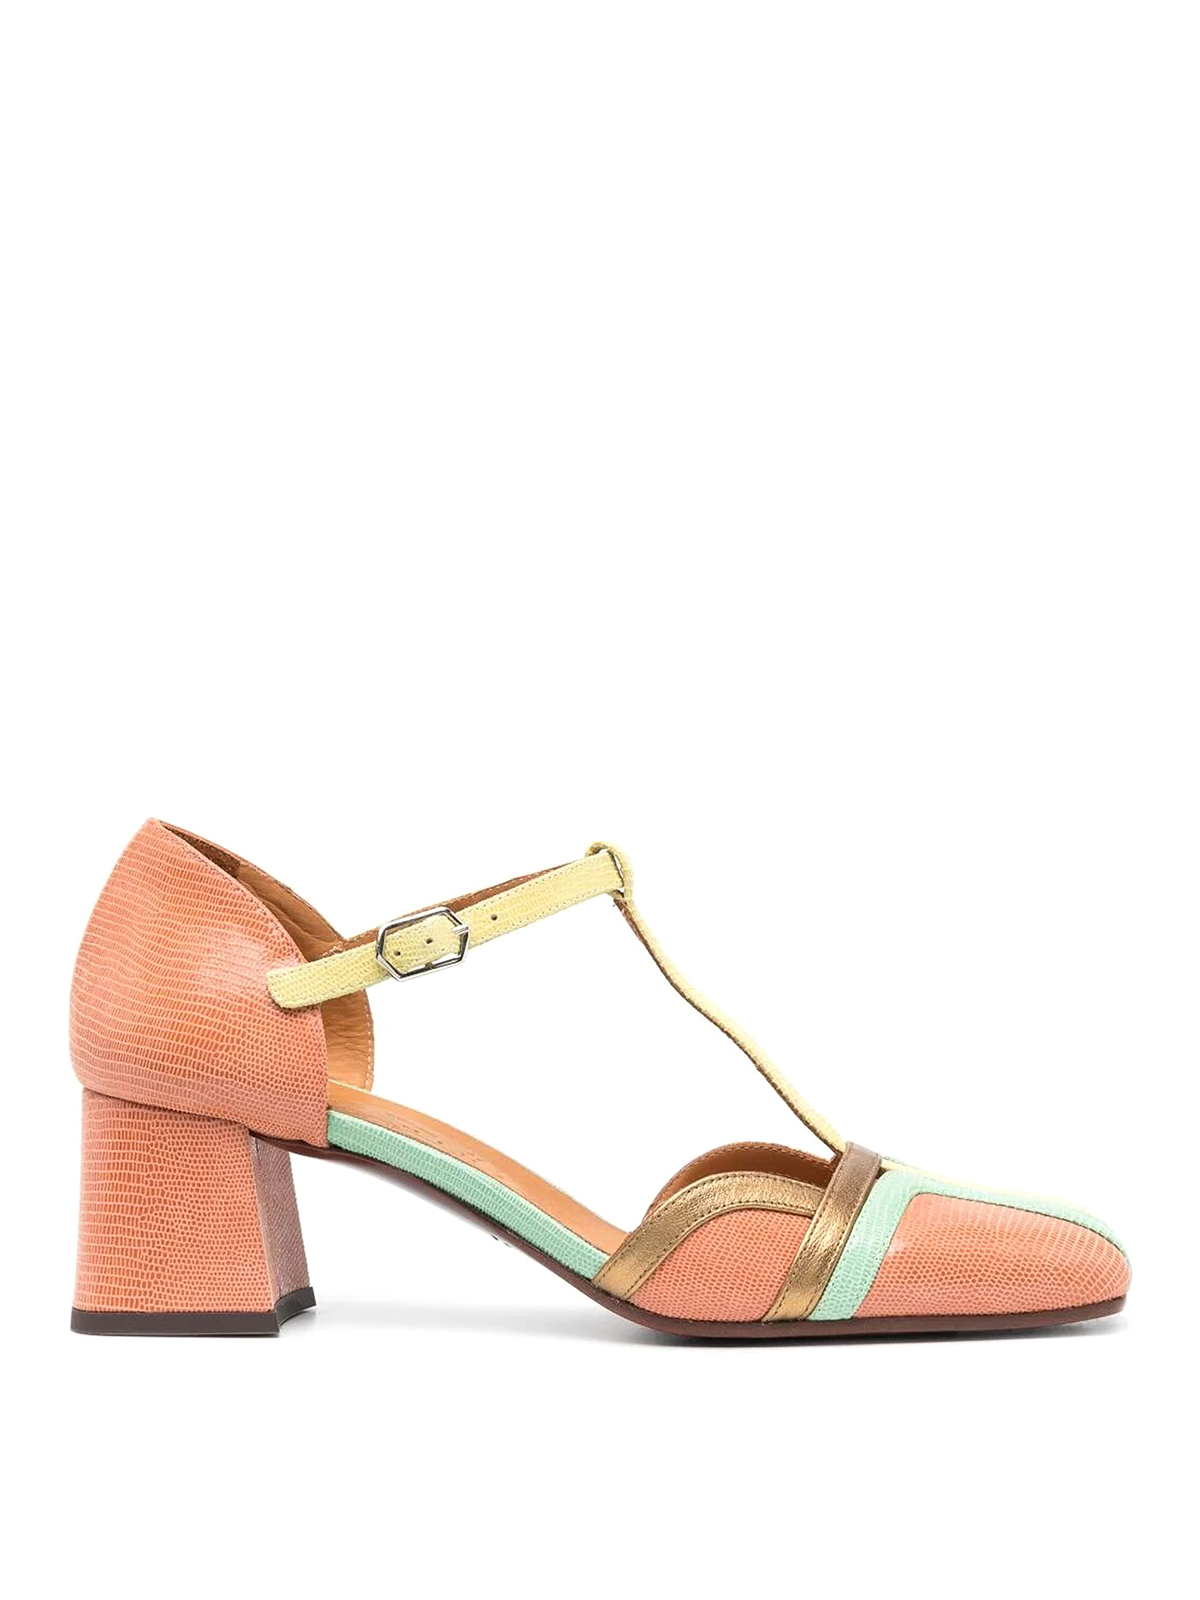 Chie Mihara Sandals In Yellow